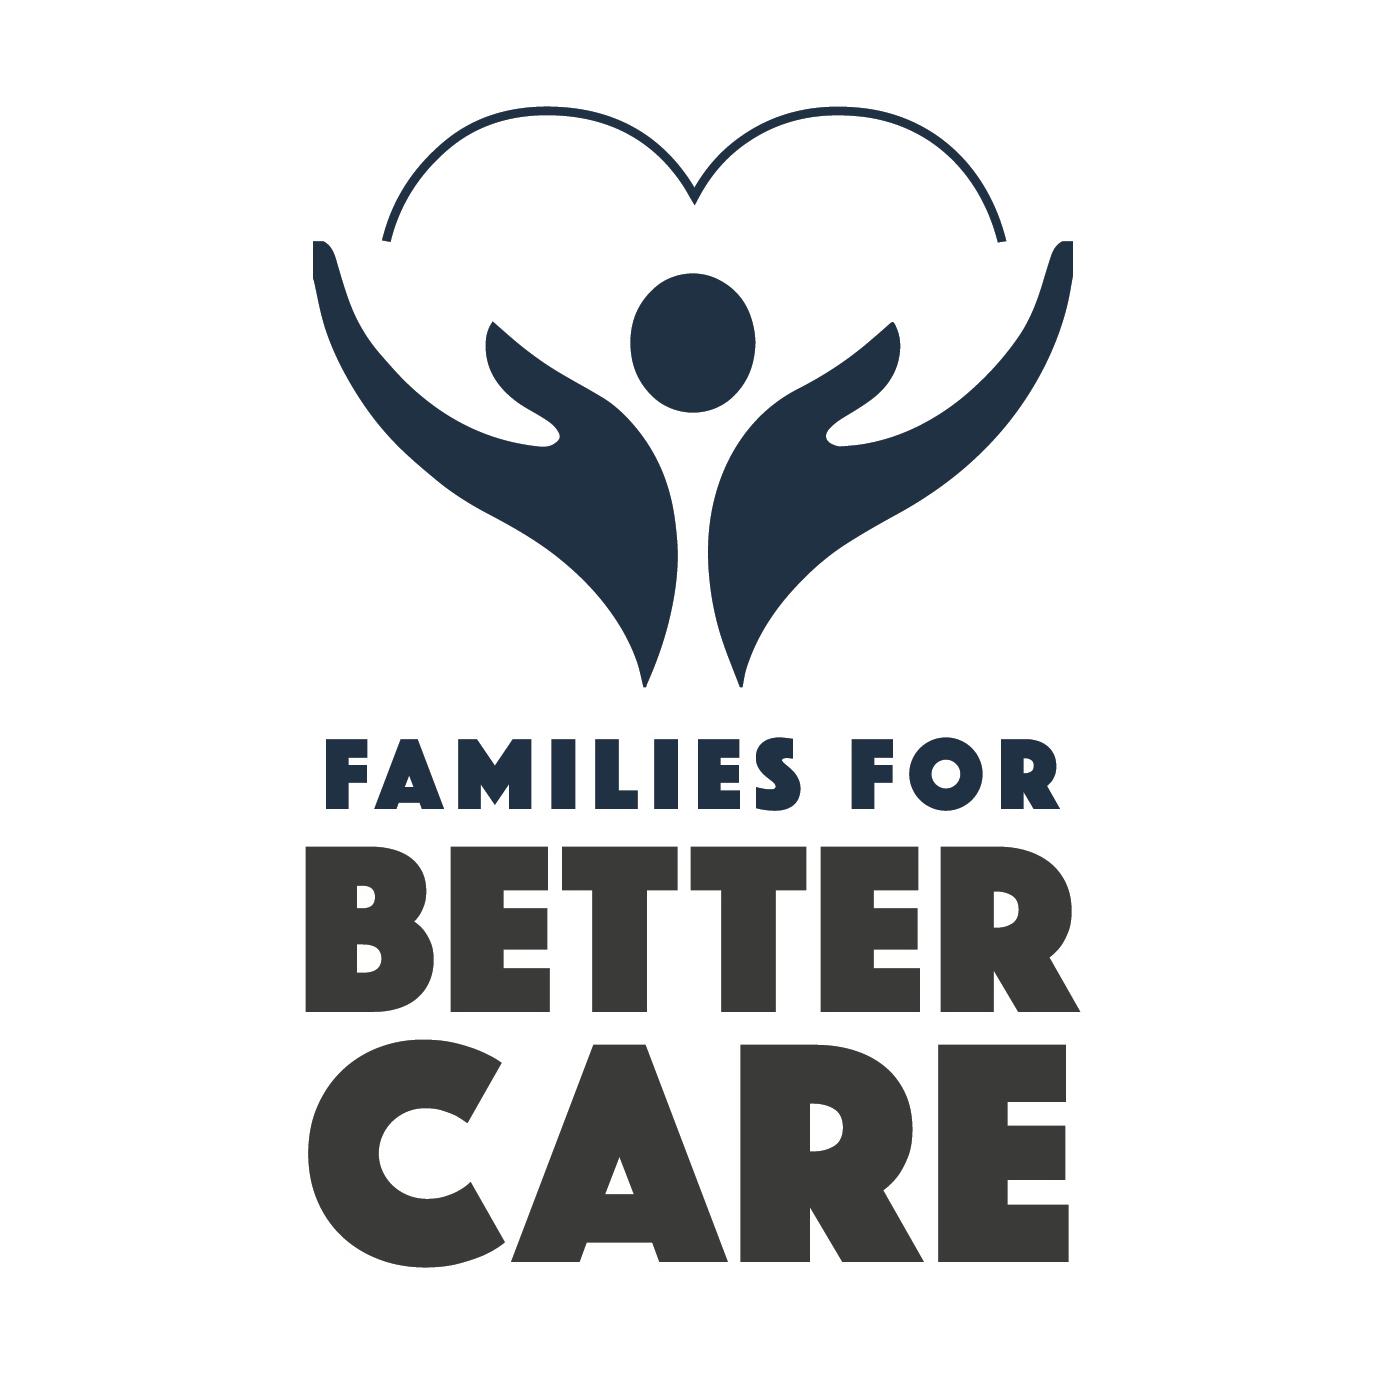 Families for Better Care Nursing Home Stimulus Payment Image